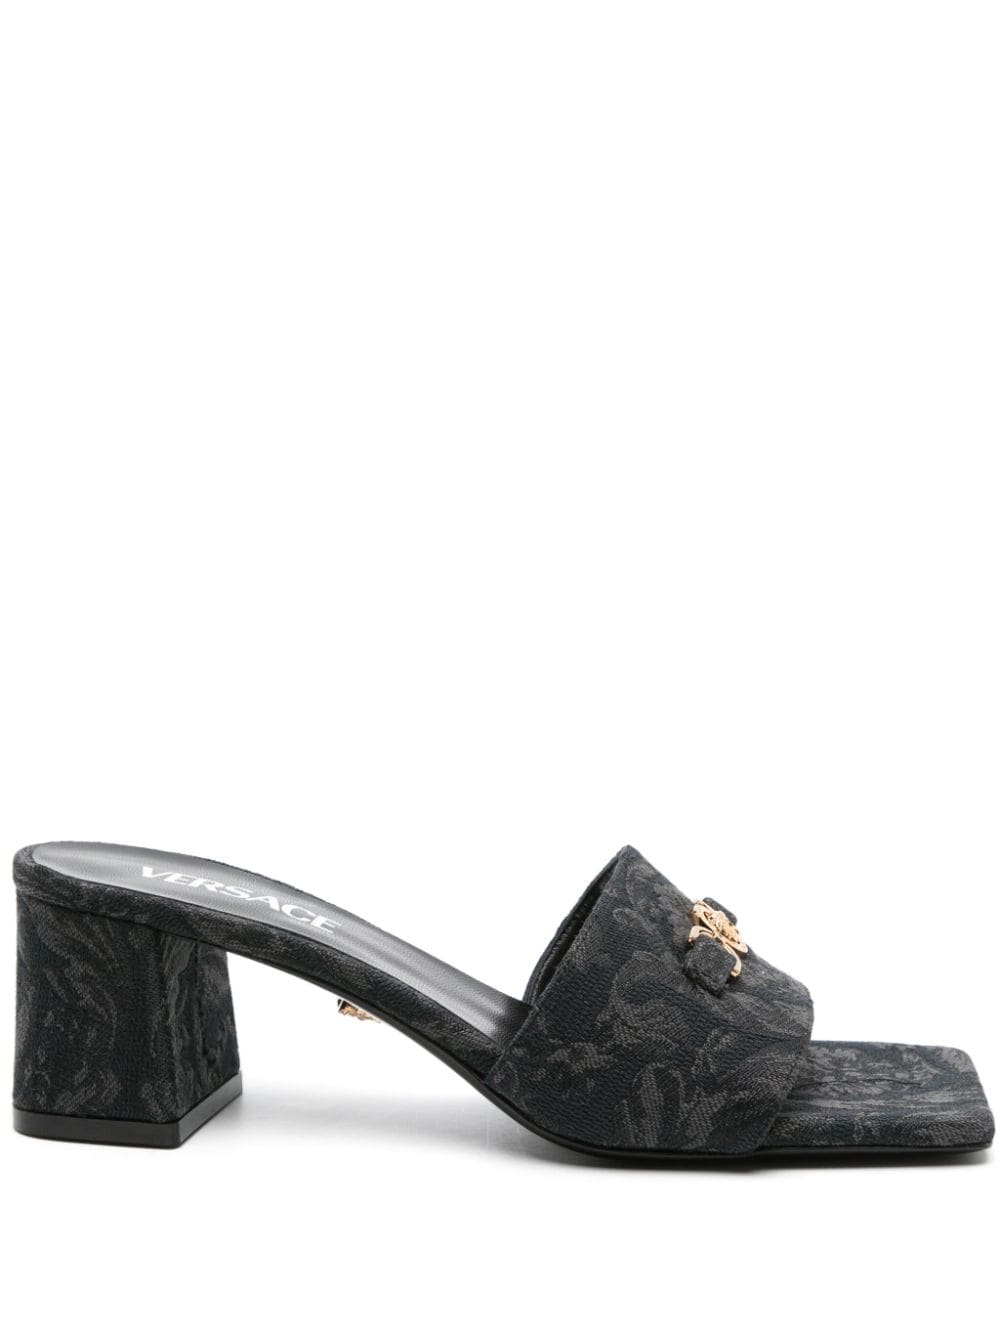 VERSACE Versatile and Chic: Baroque Print Flat for Women